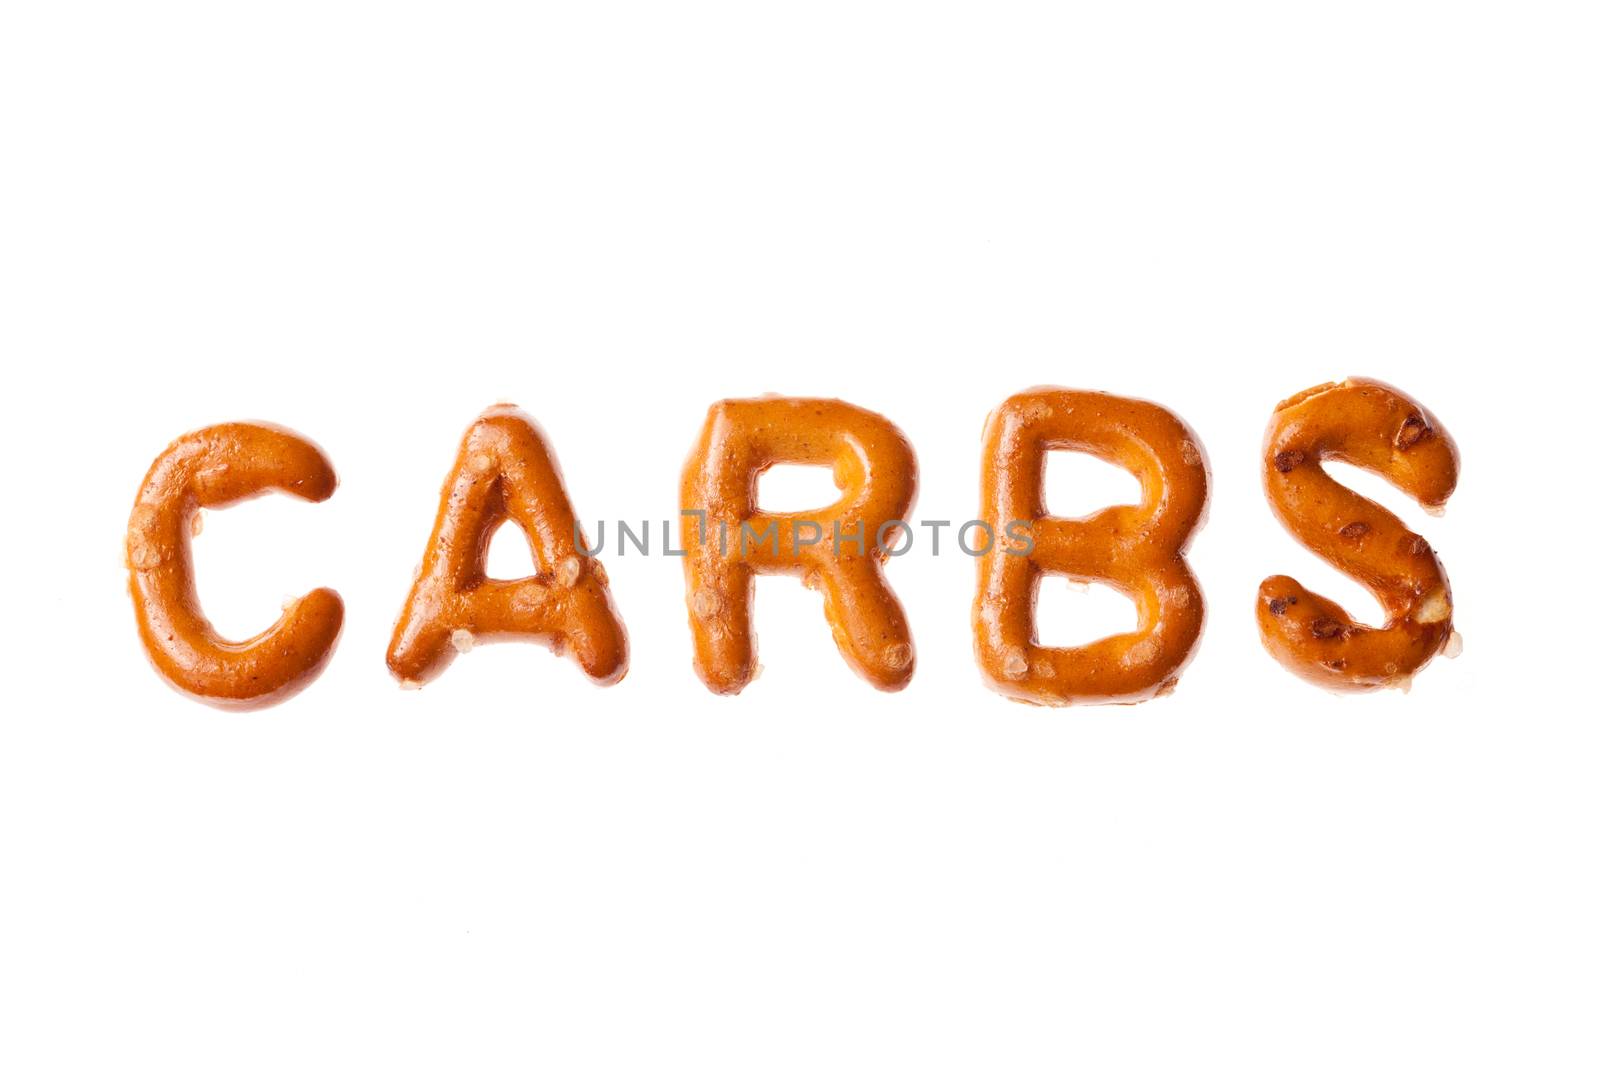 Word CARBS written, laid-out, with crispy alphabet pretzels isolated on white background